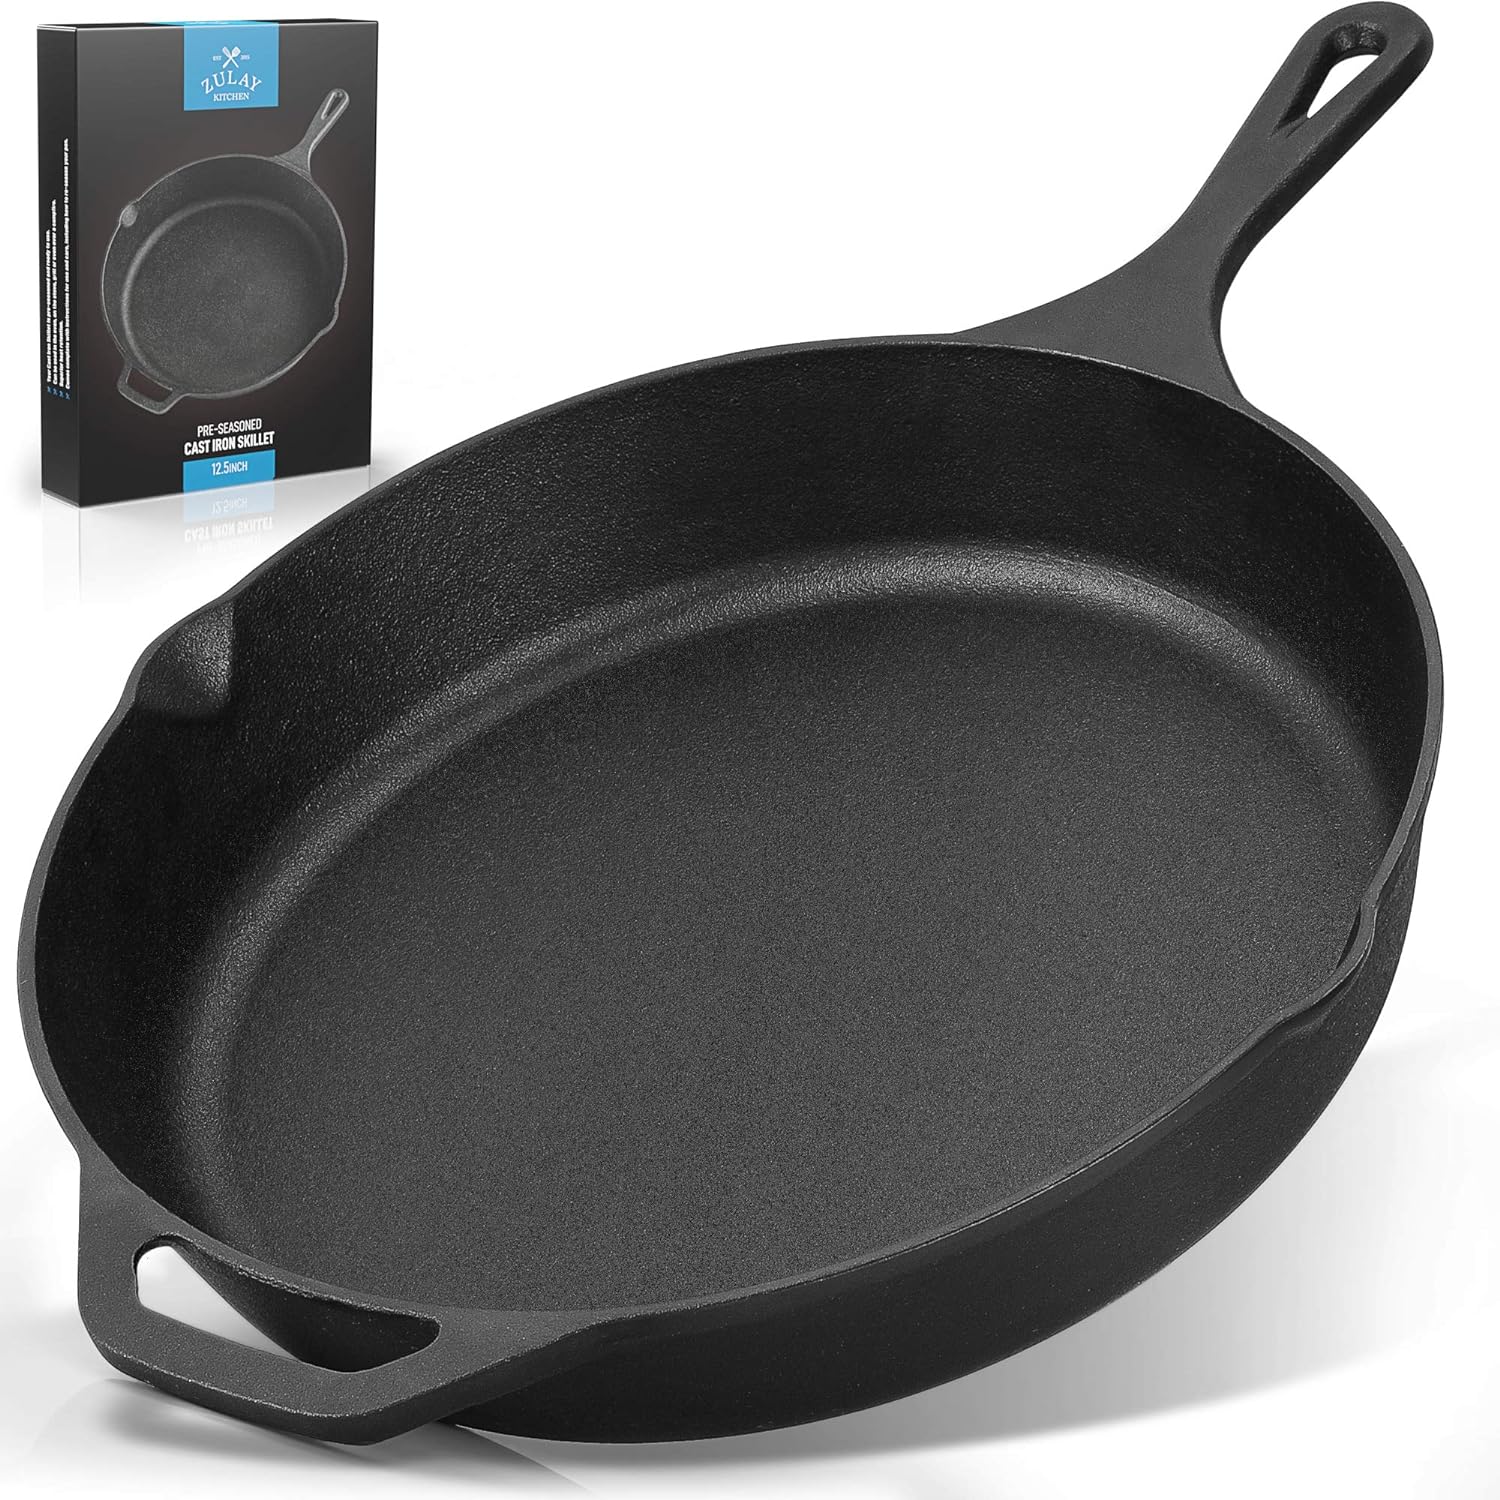 CAST IRON SKILLETS 12 INCHES